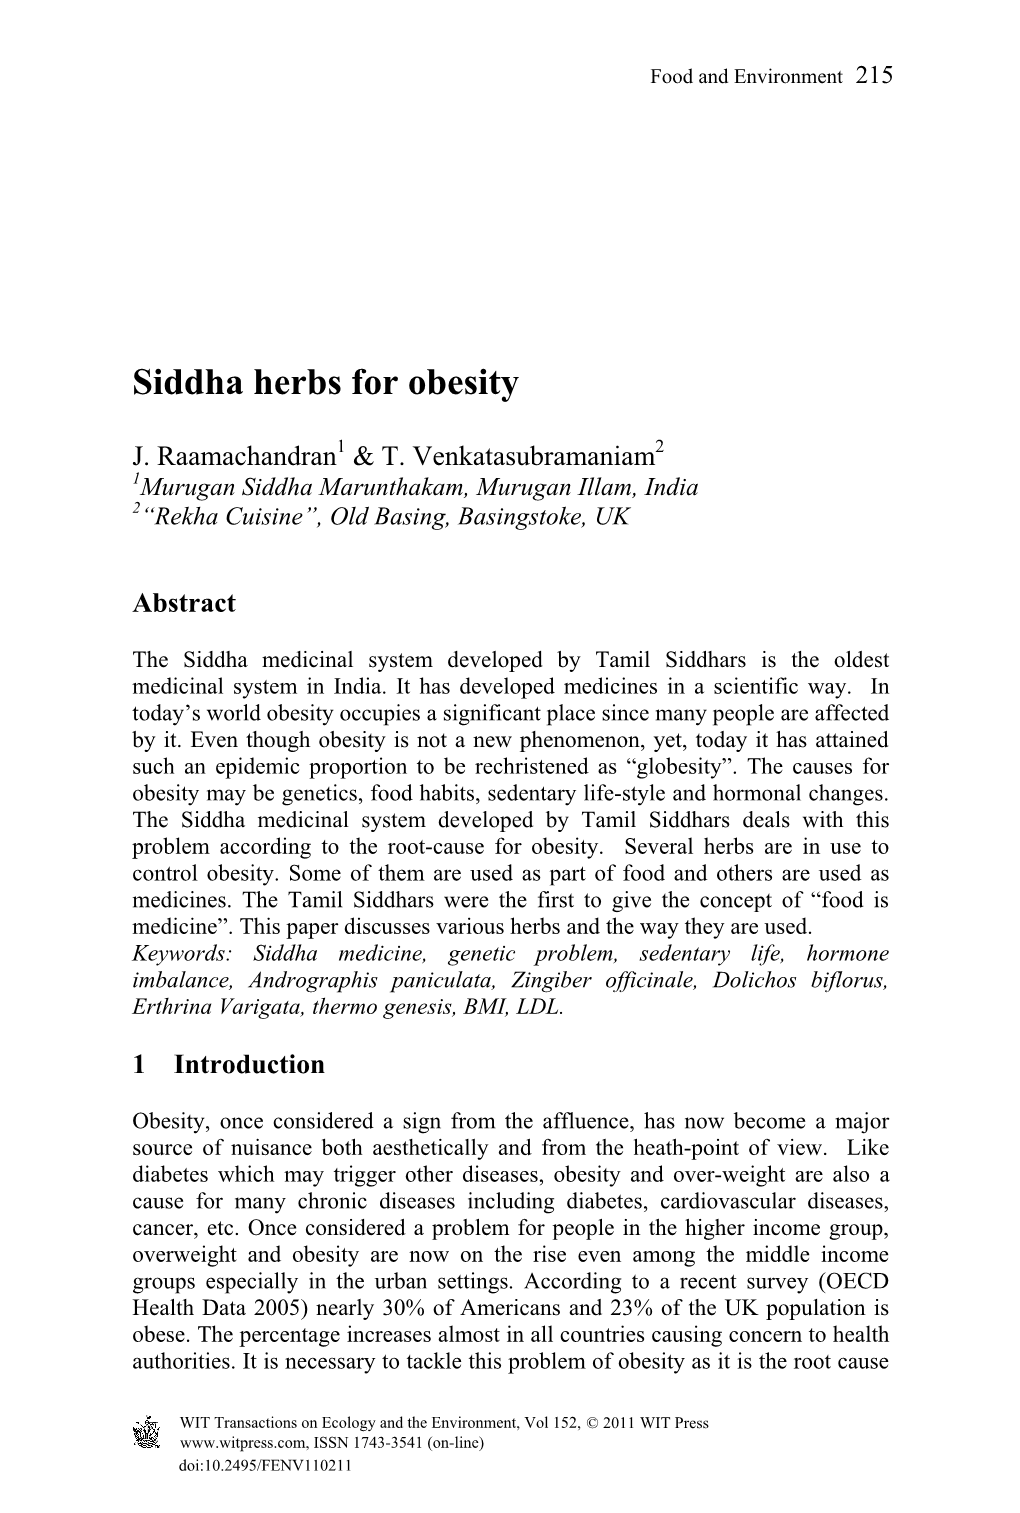 Siddha Herbs for Obesity